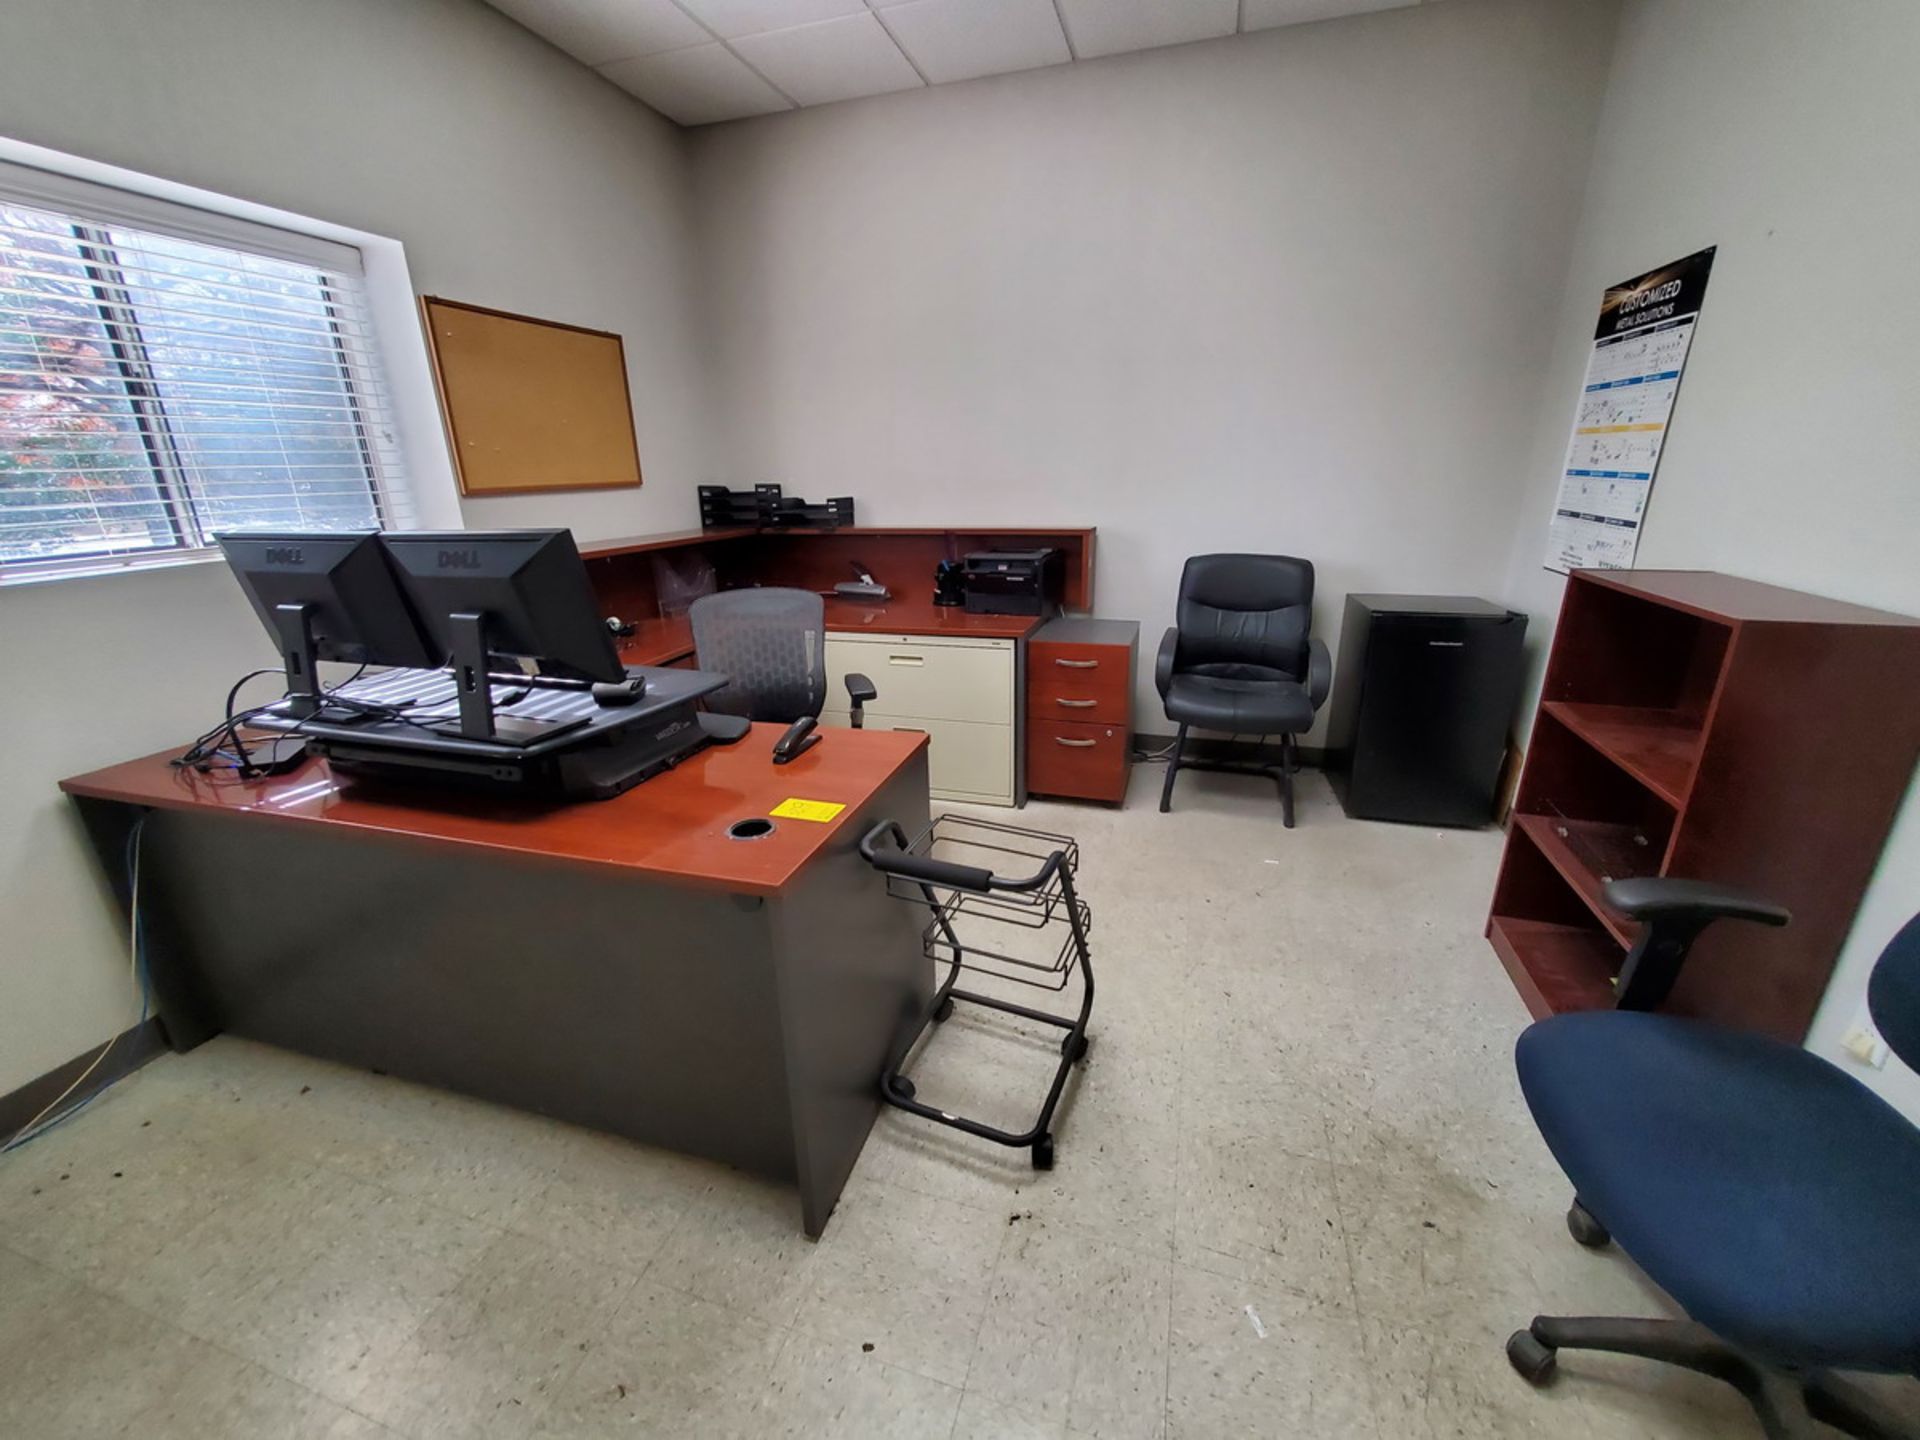 Office Contents To Include But Not Limited To: 3Pc Desk, (2) Dell Monitors, Shredders, (3) File